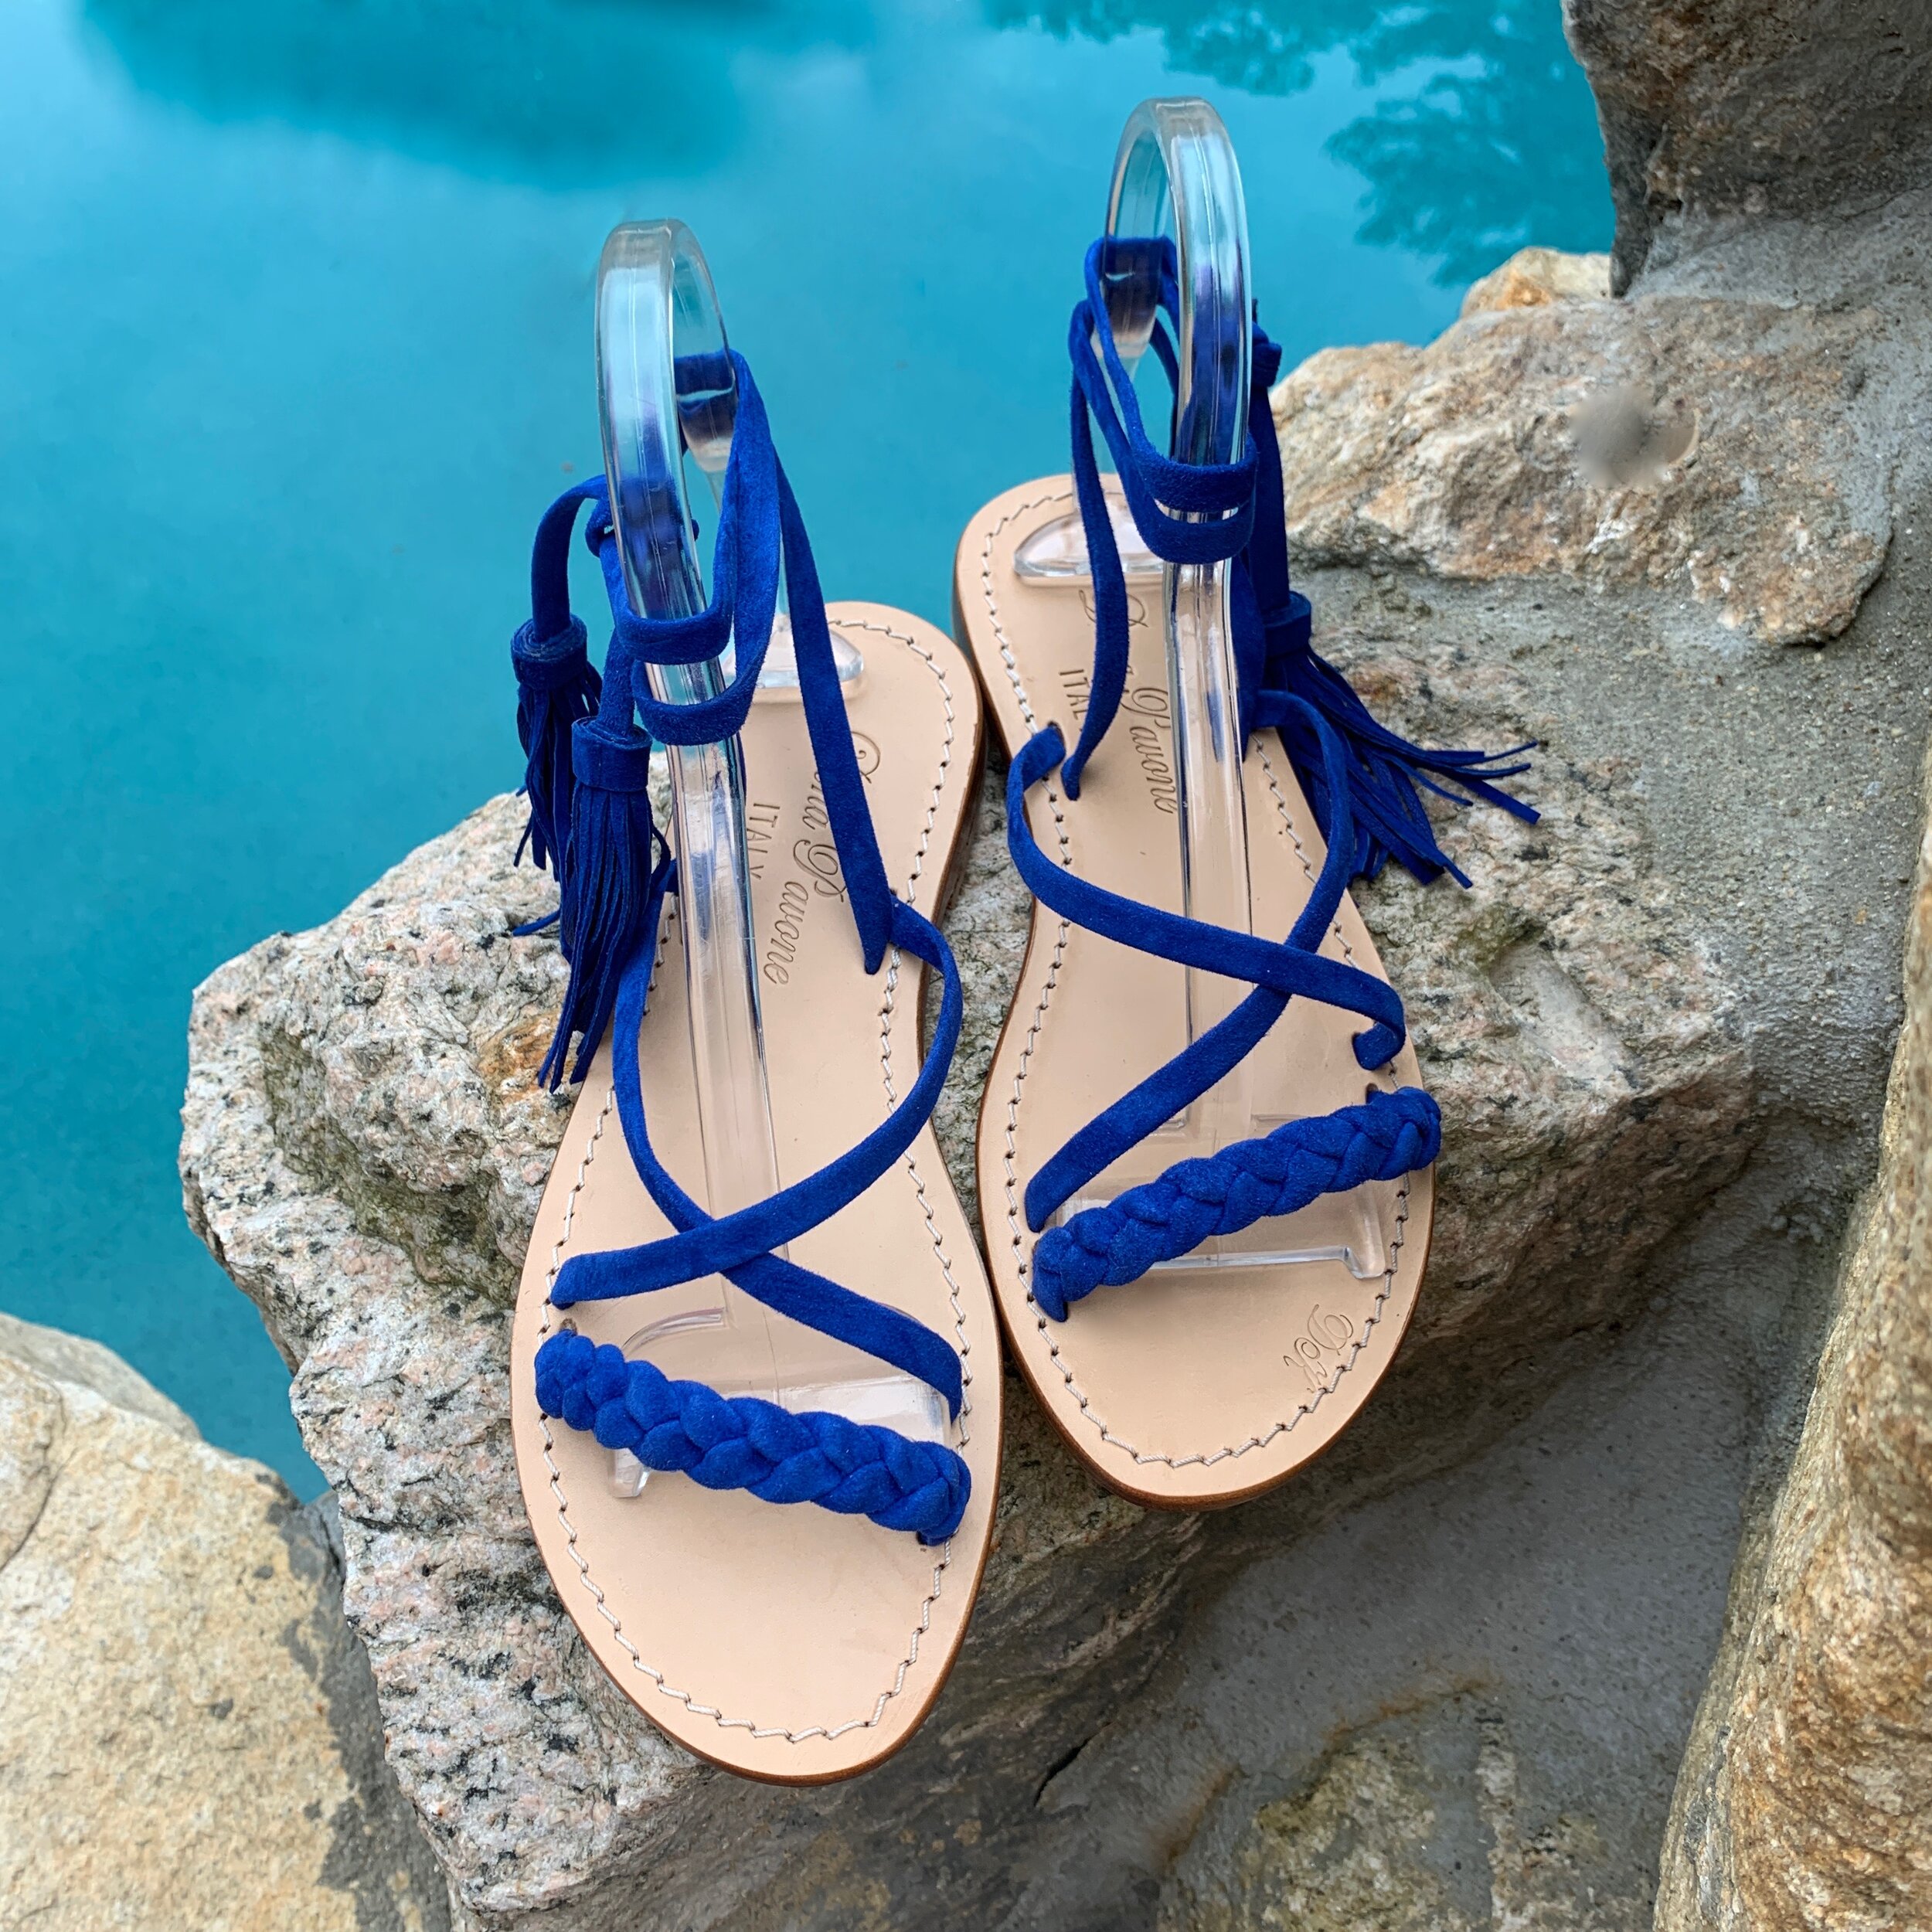 Ladies Summer T-Bar Sandals | Genuine Leather | Made in Italy - Aliverti  (LO20601BLU)